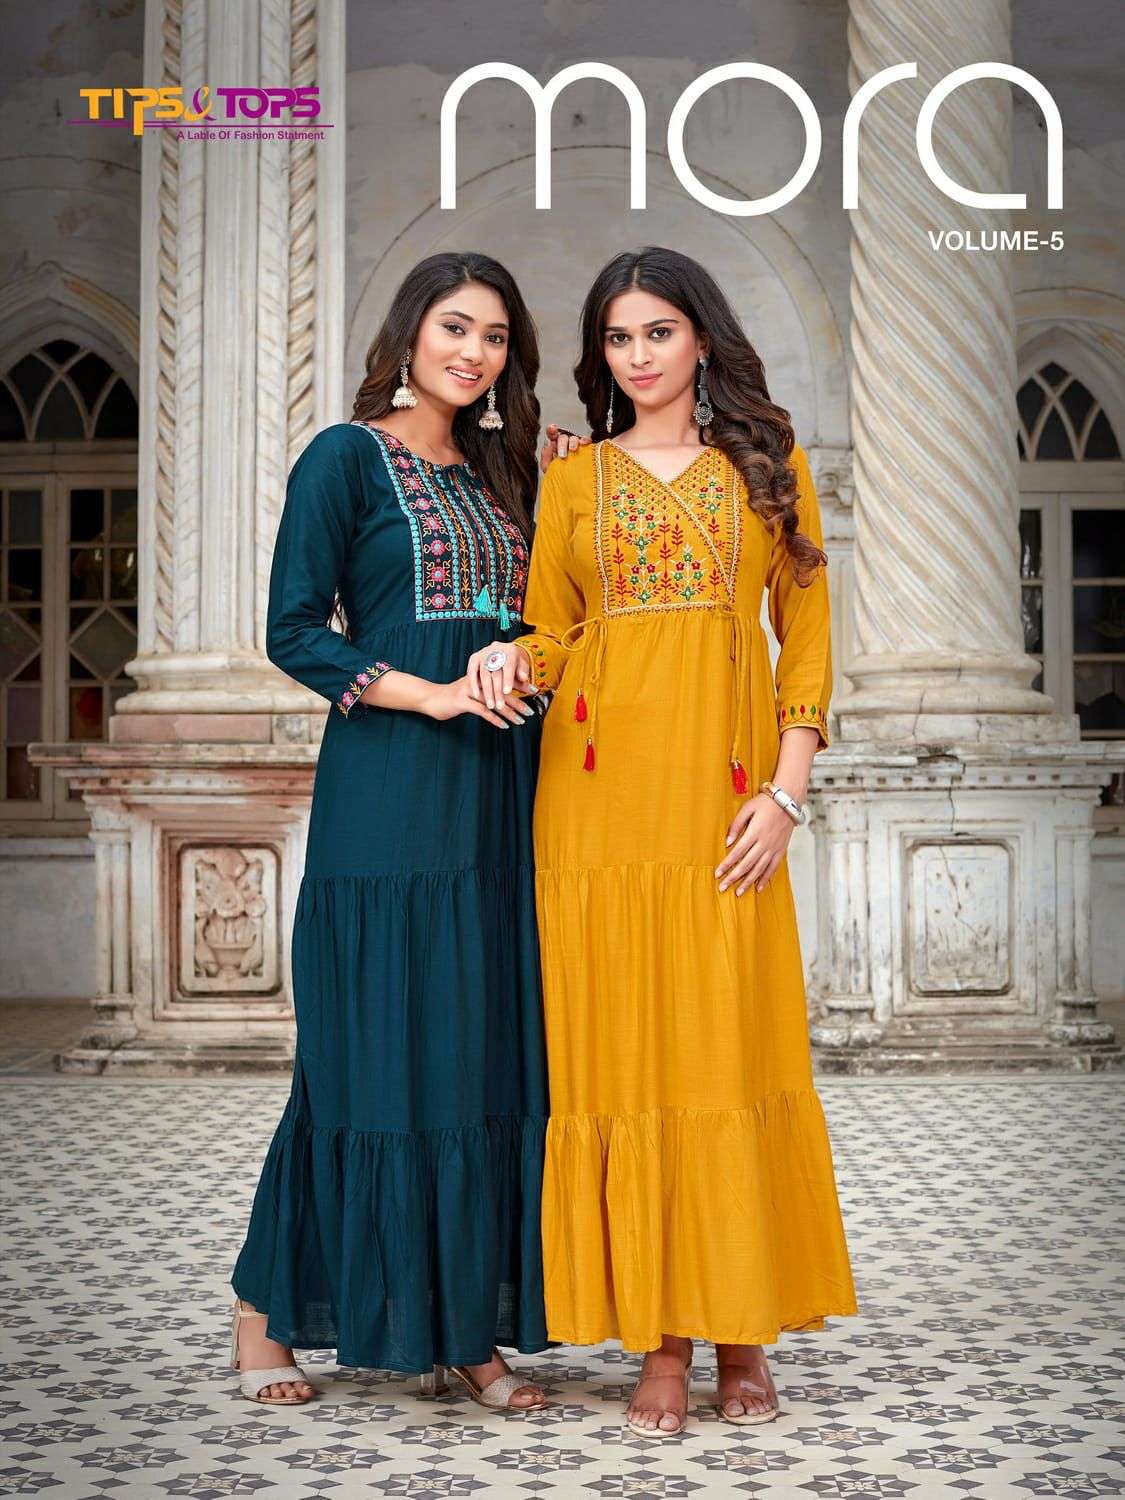 Tips And Tops Mora Vol 5 Rayon with handwork Long Gown Kurti...